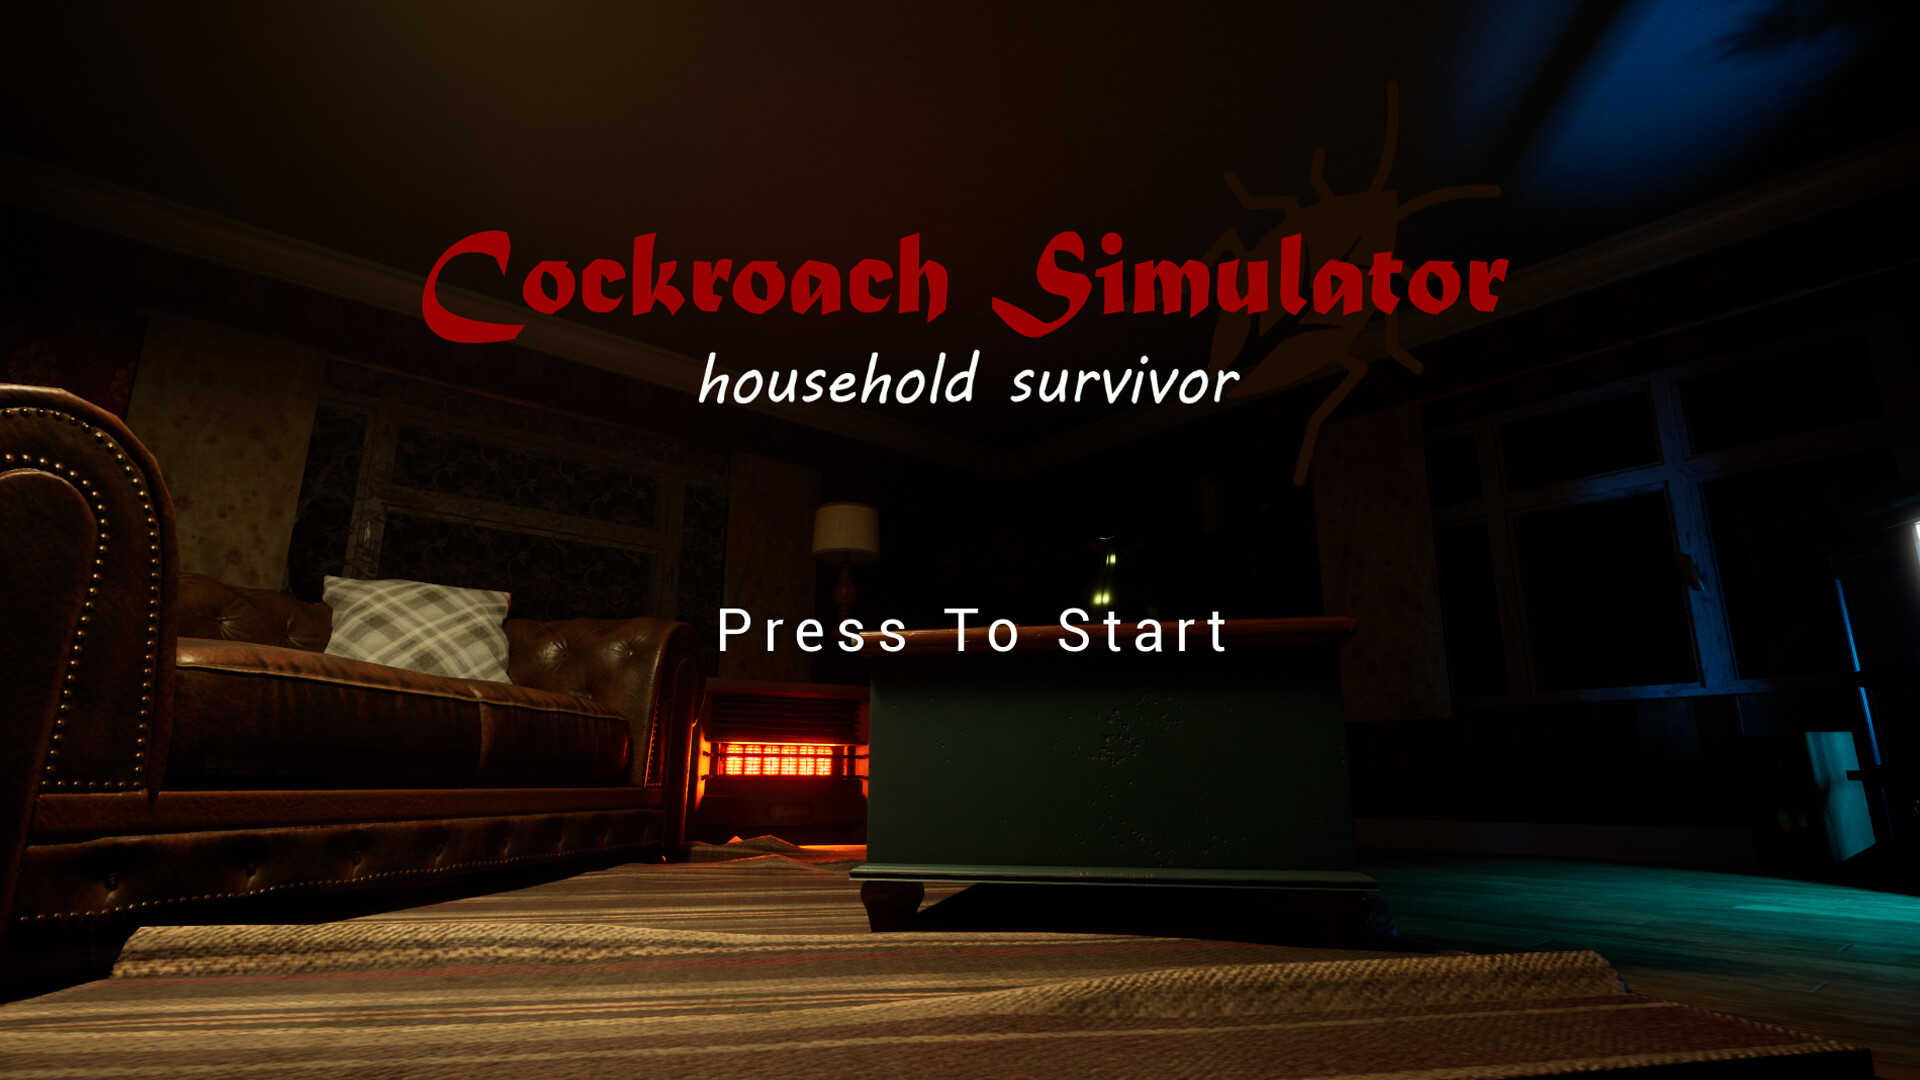 Cockroach Simulator household survivor Free Download for PC